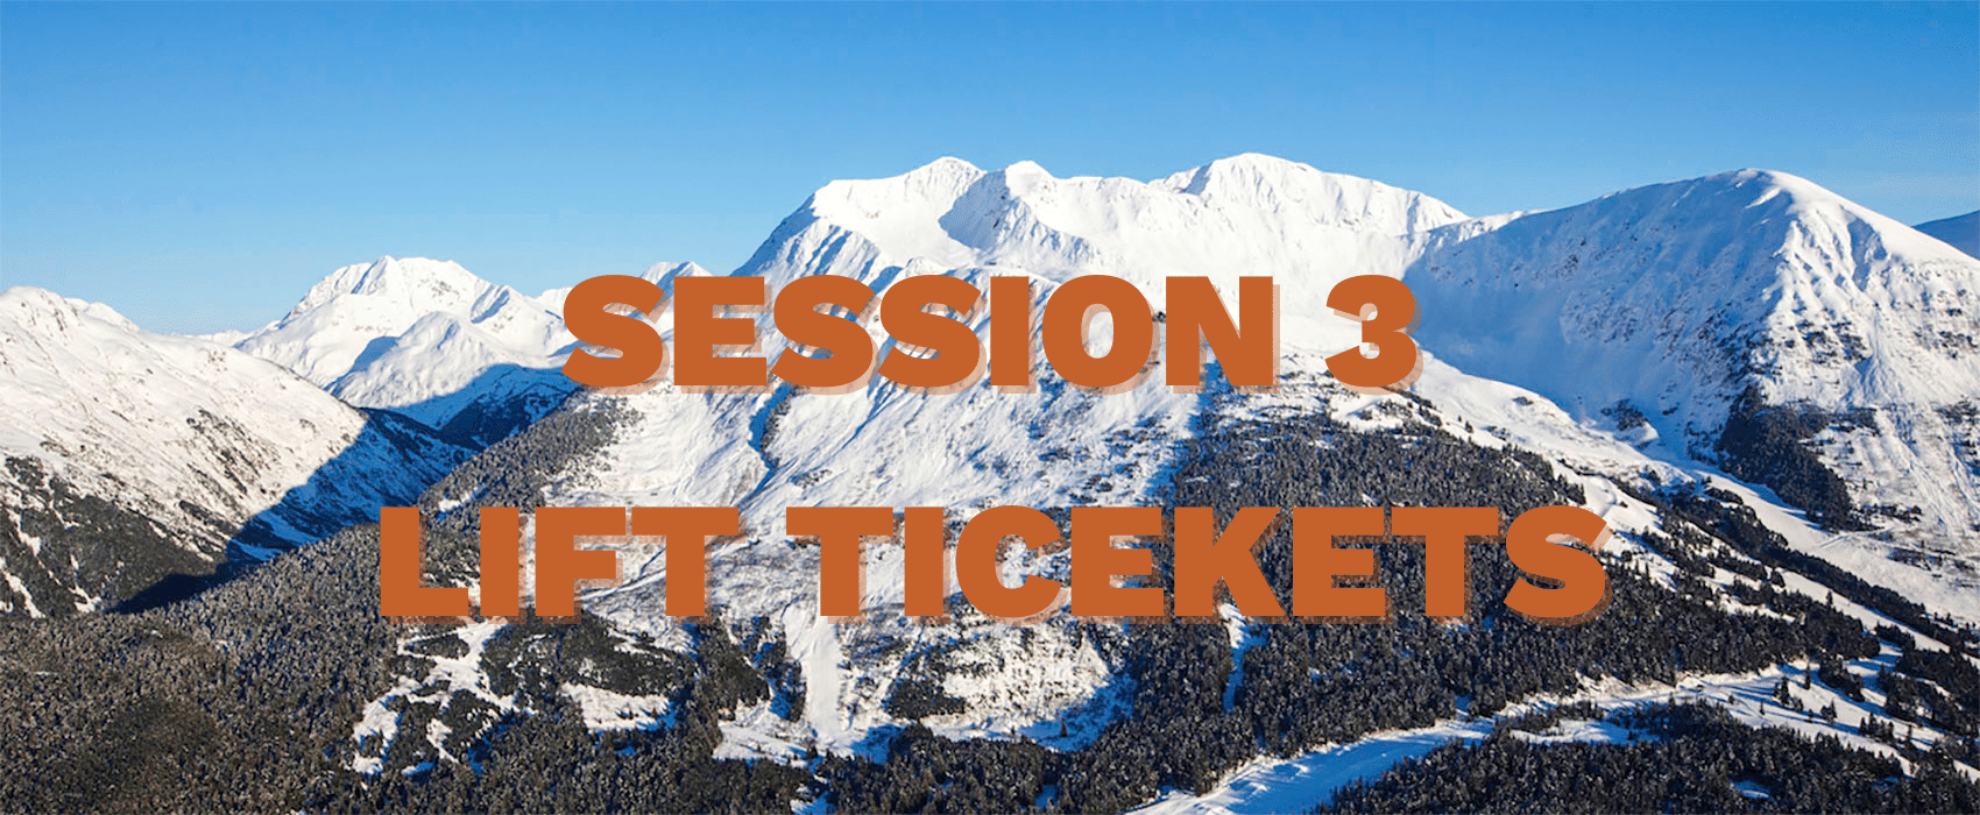 Session 3 Lift Tickets